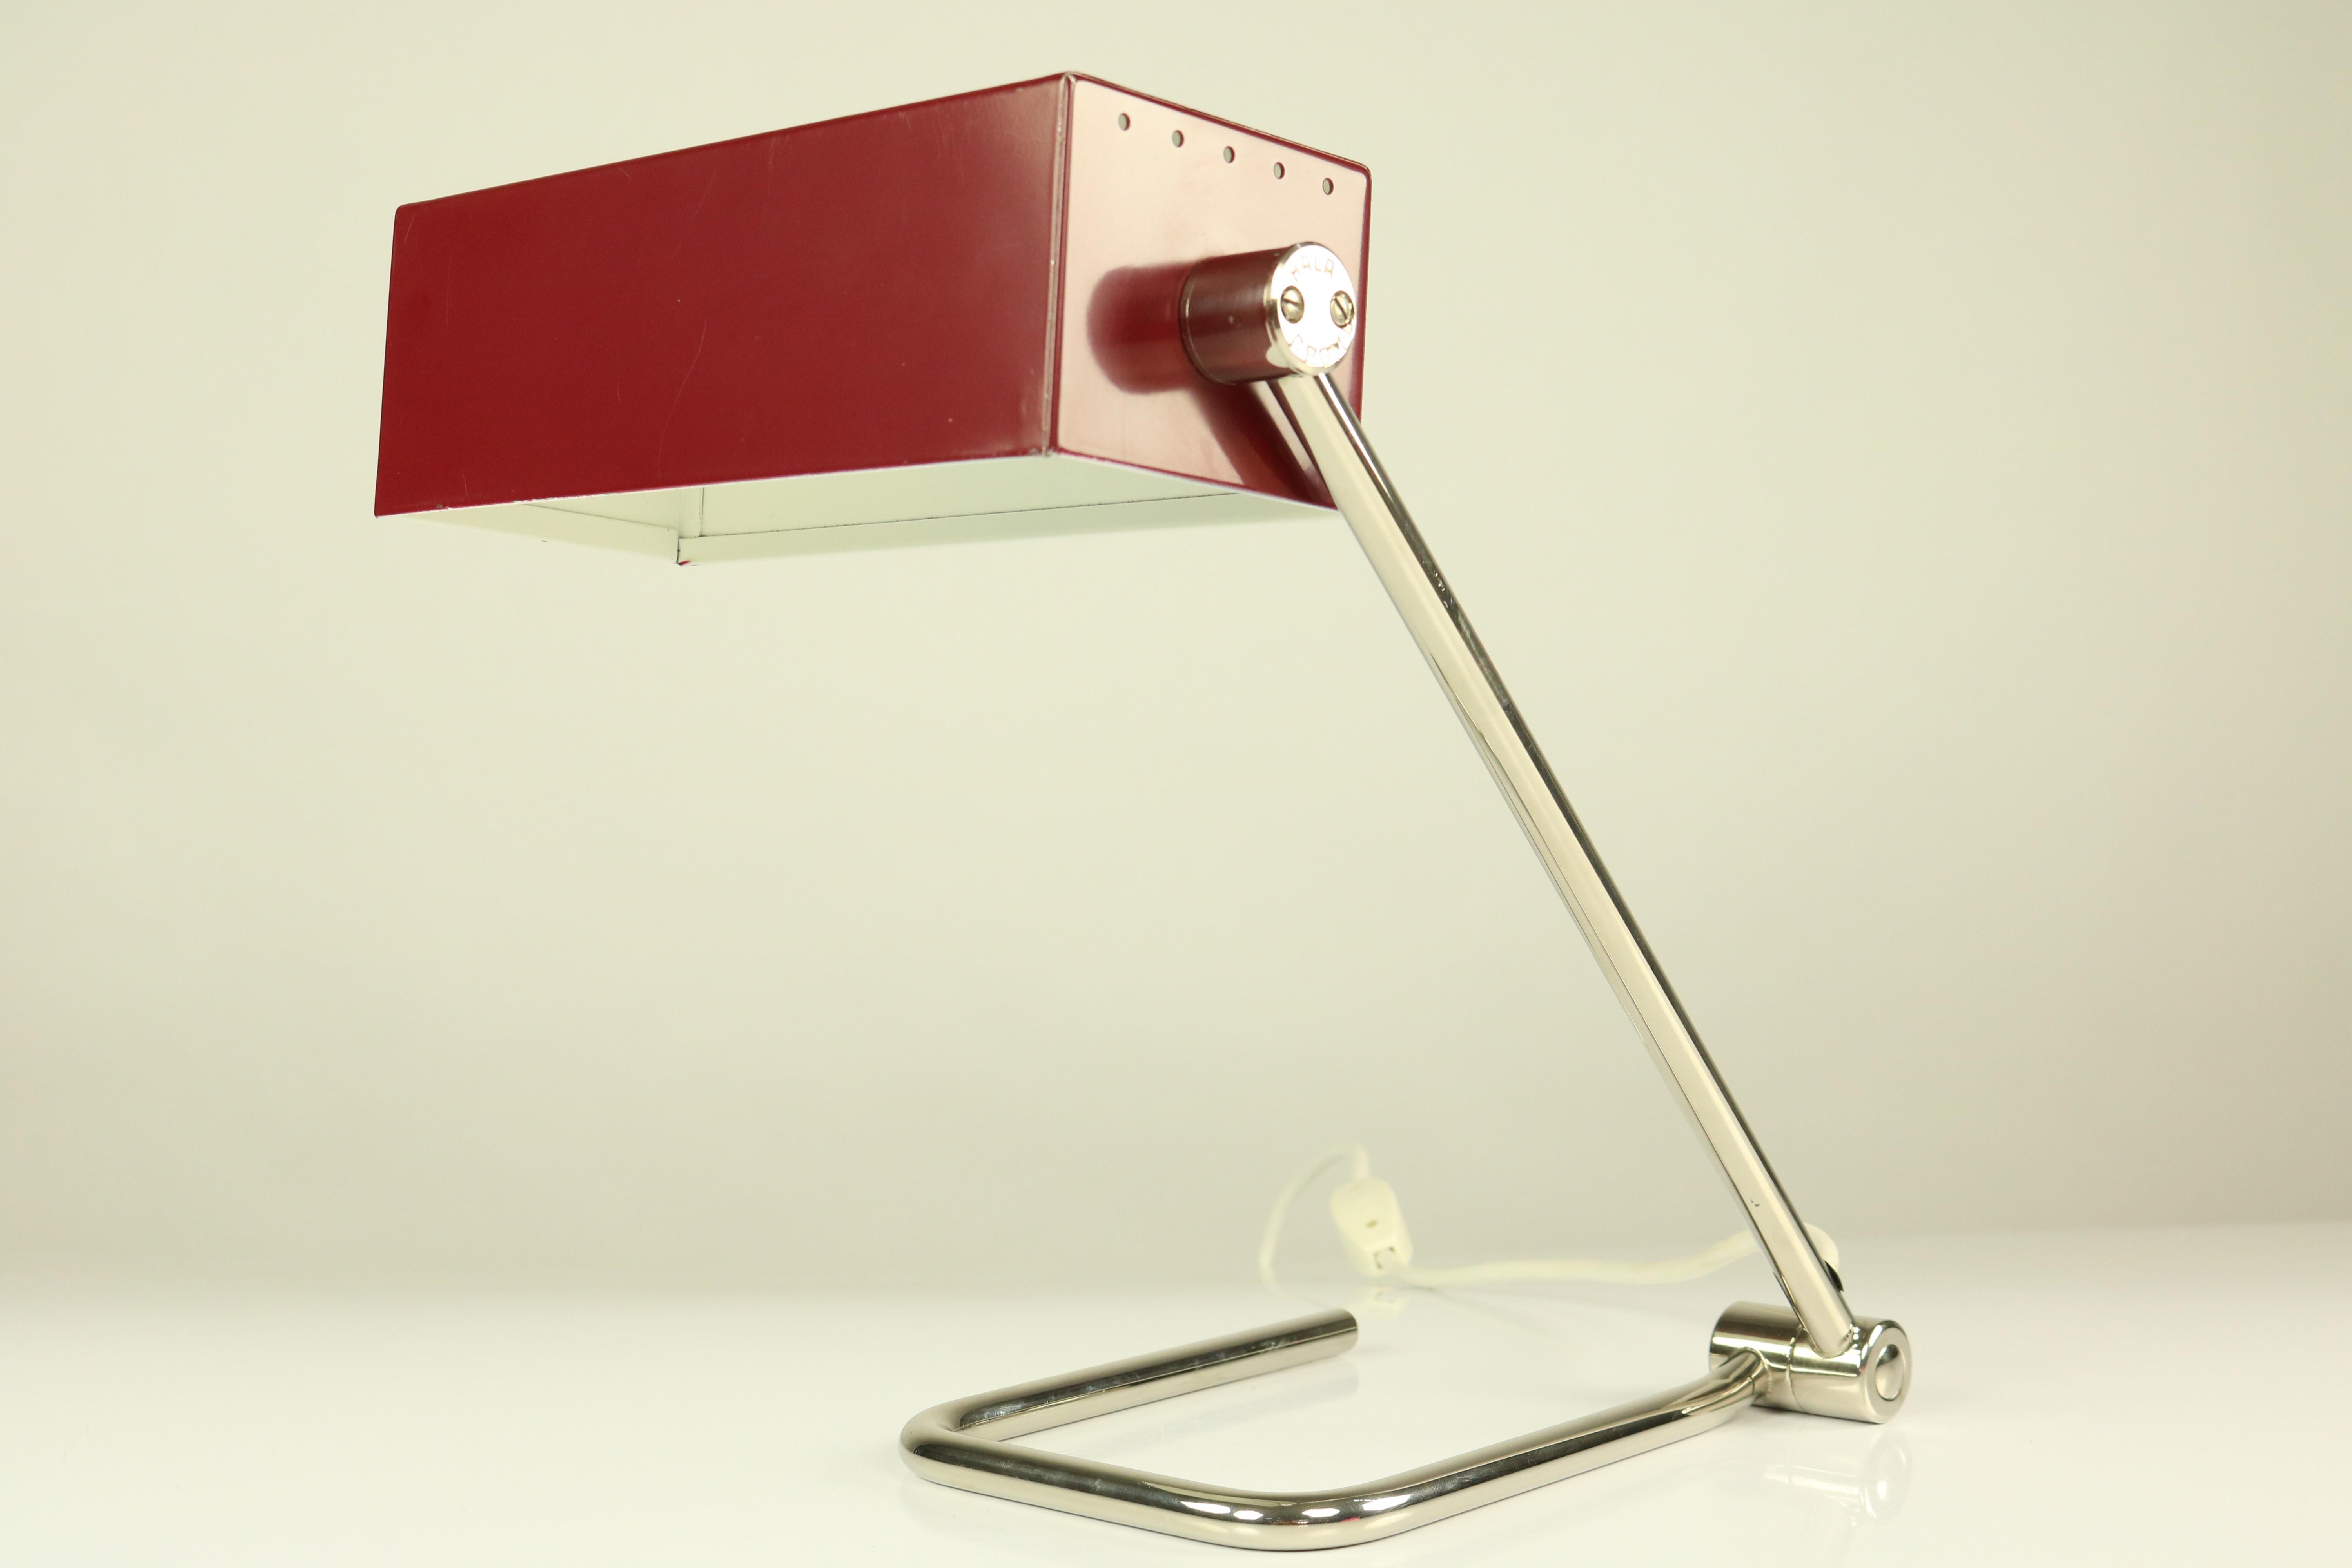 Midcentury Table Lamp by Hala Germany Wine Red and Chrome Vintage, 1950s-1960s For Sale 1